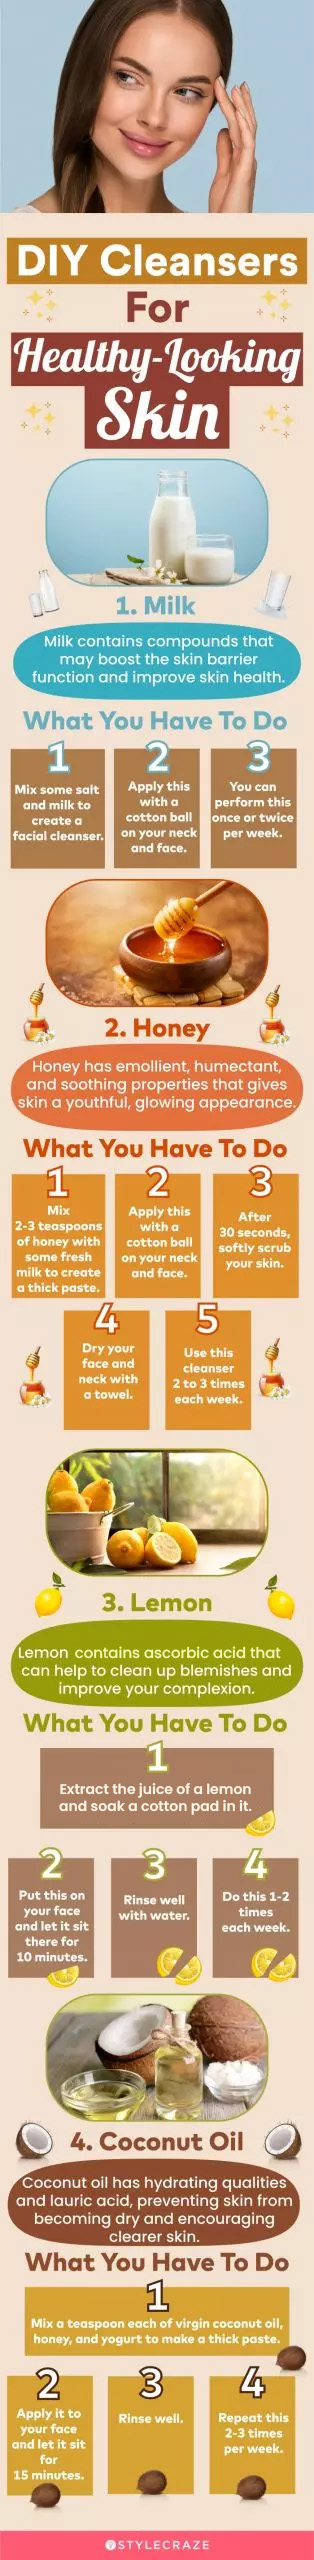 diy cleansers for healthy looking skin (infographic)